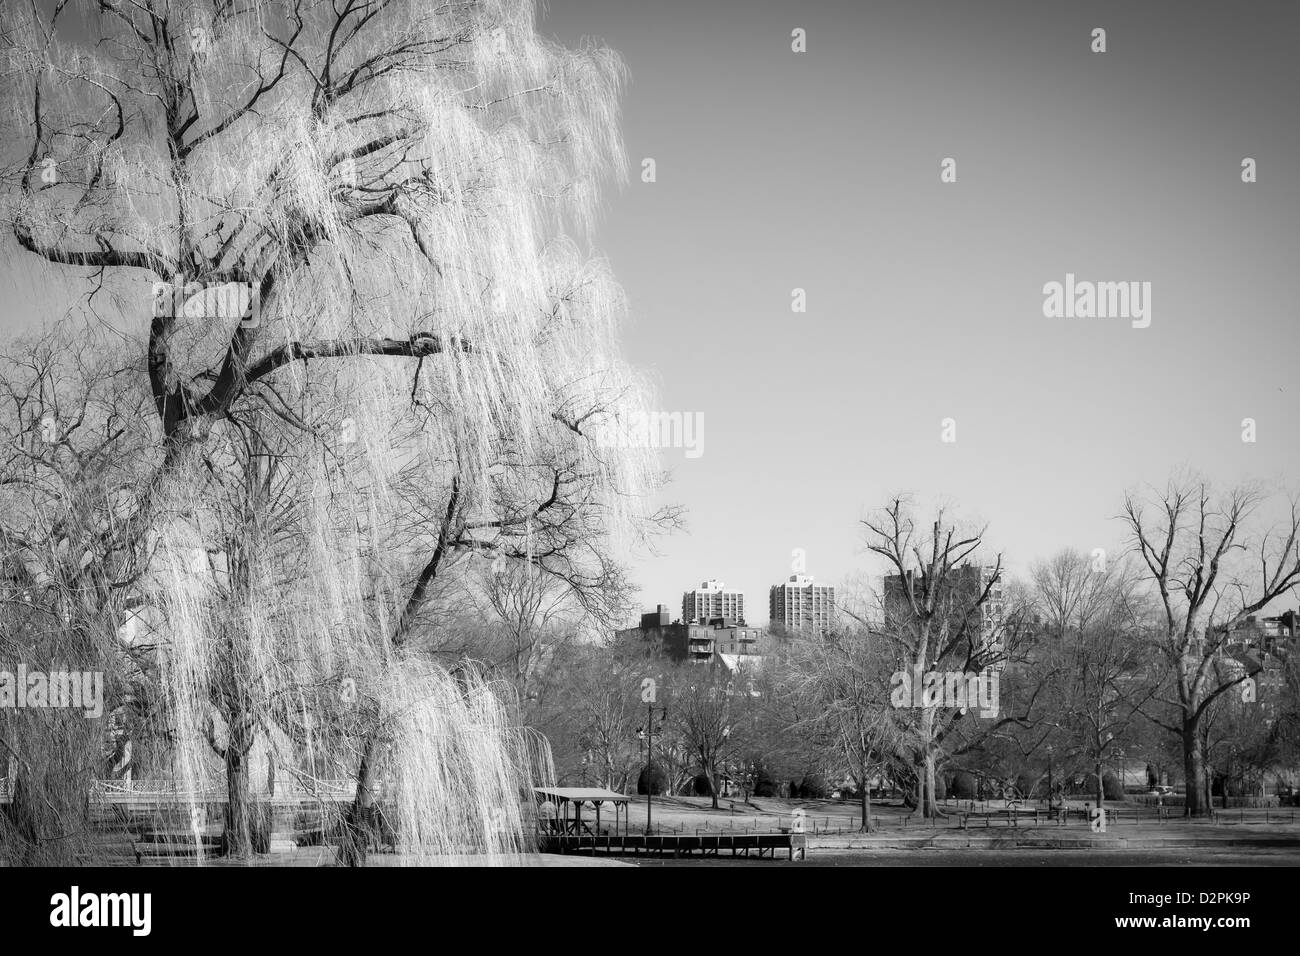 Weeping Willow Tree in Boston Public Gardens Stock Photo